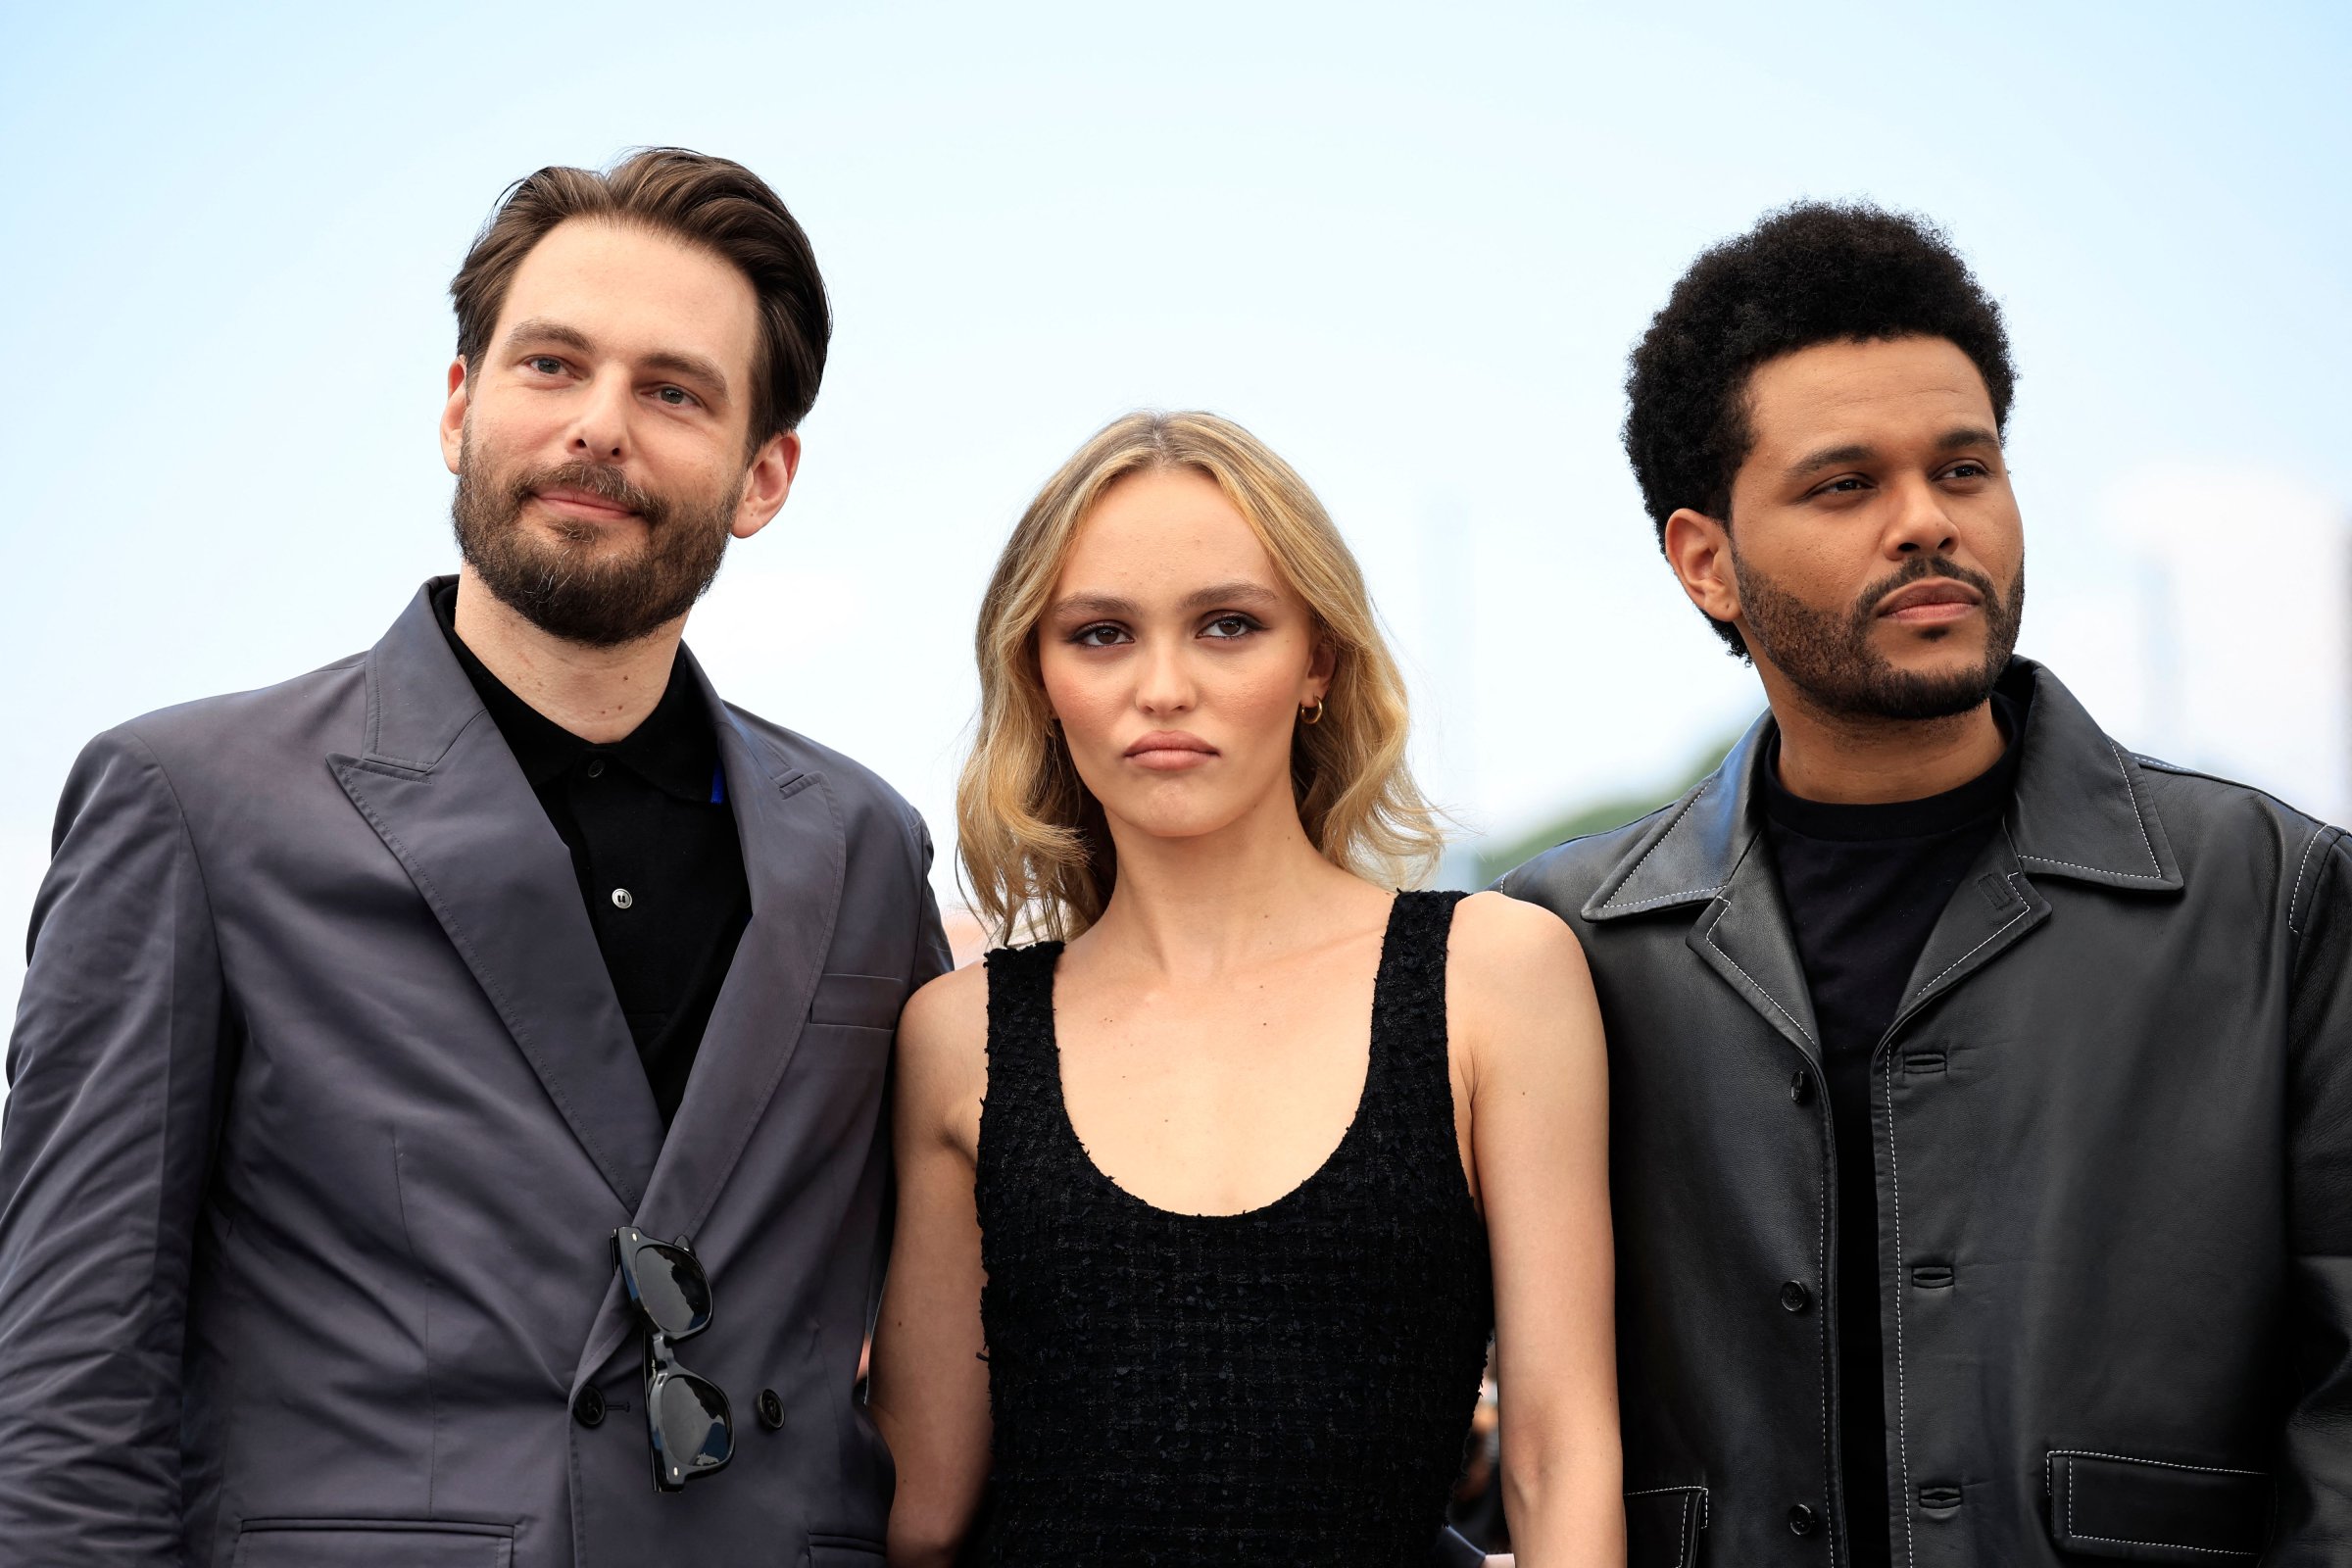 Sam Levinson, Lily-Rose Depp, and Abel "The Weeknd" Tesfaye at the Cannes Film Festival